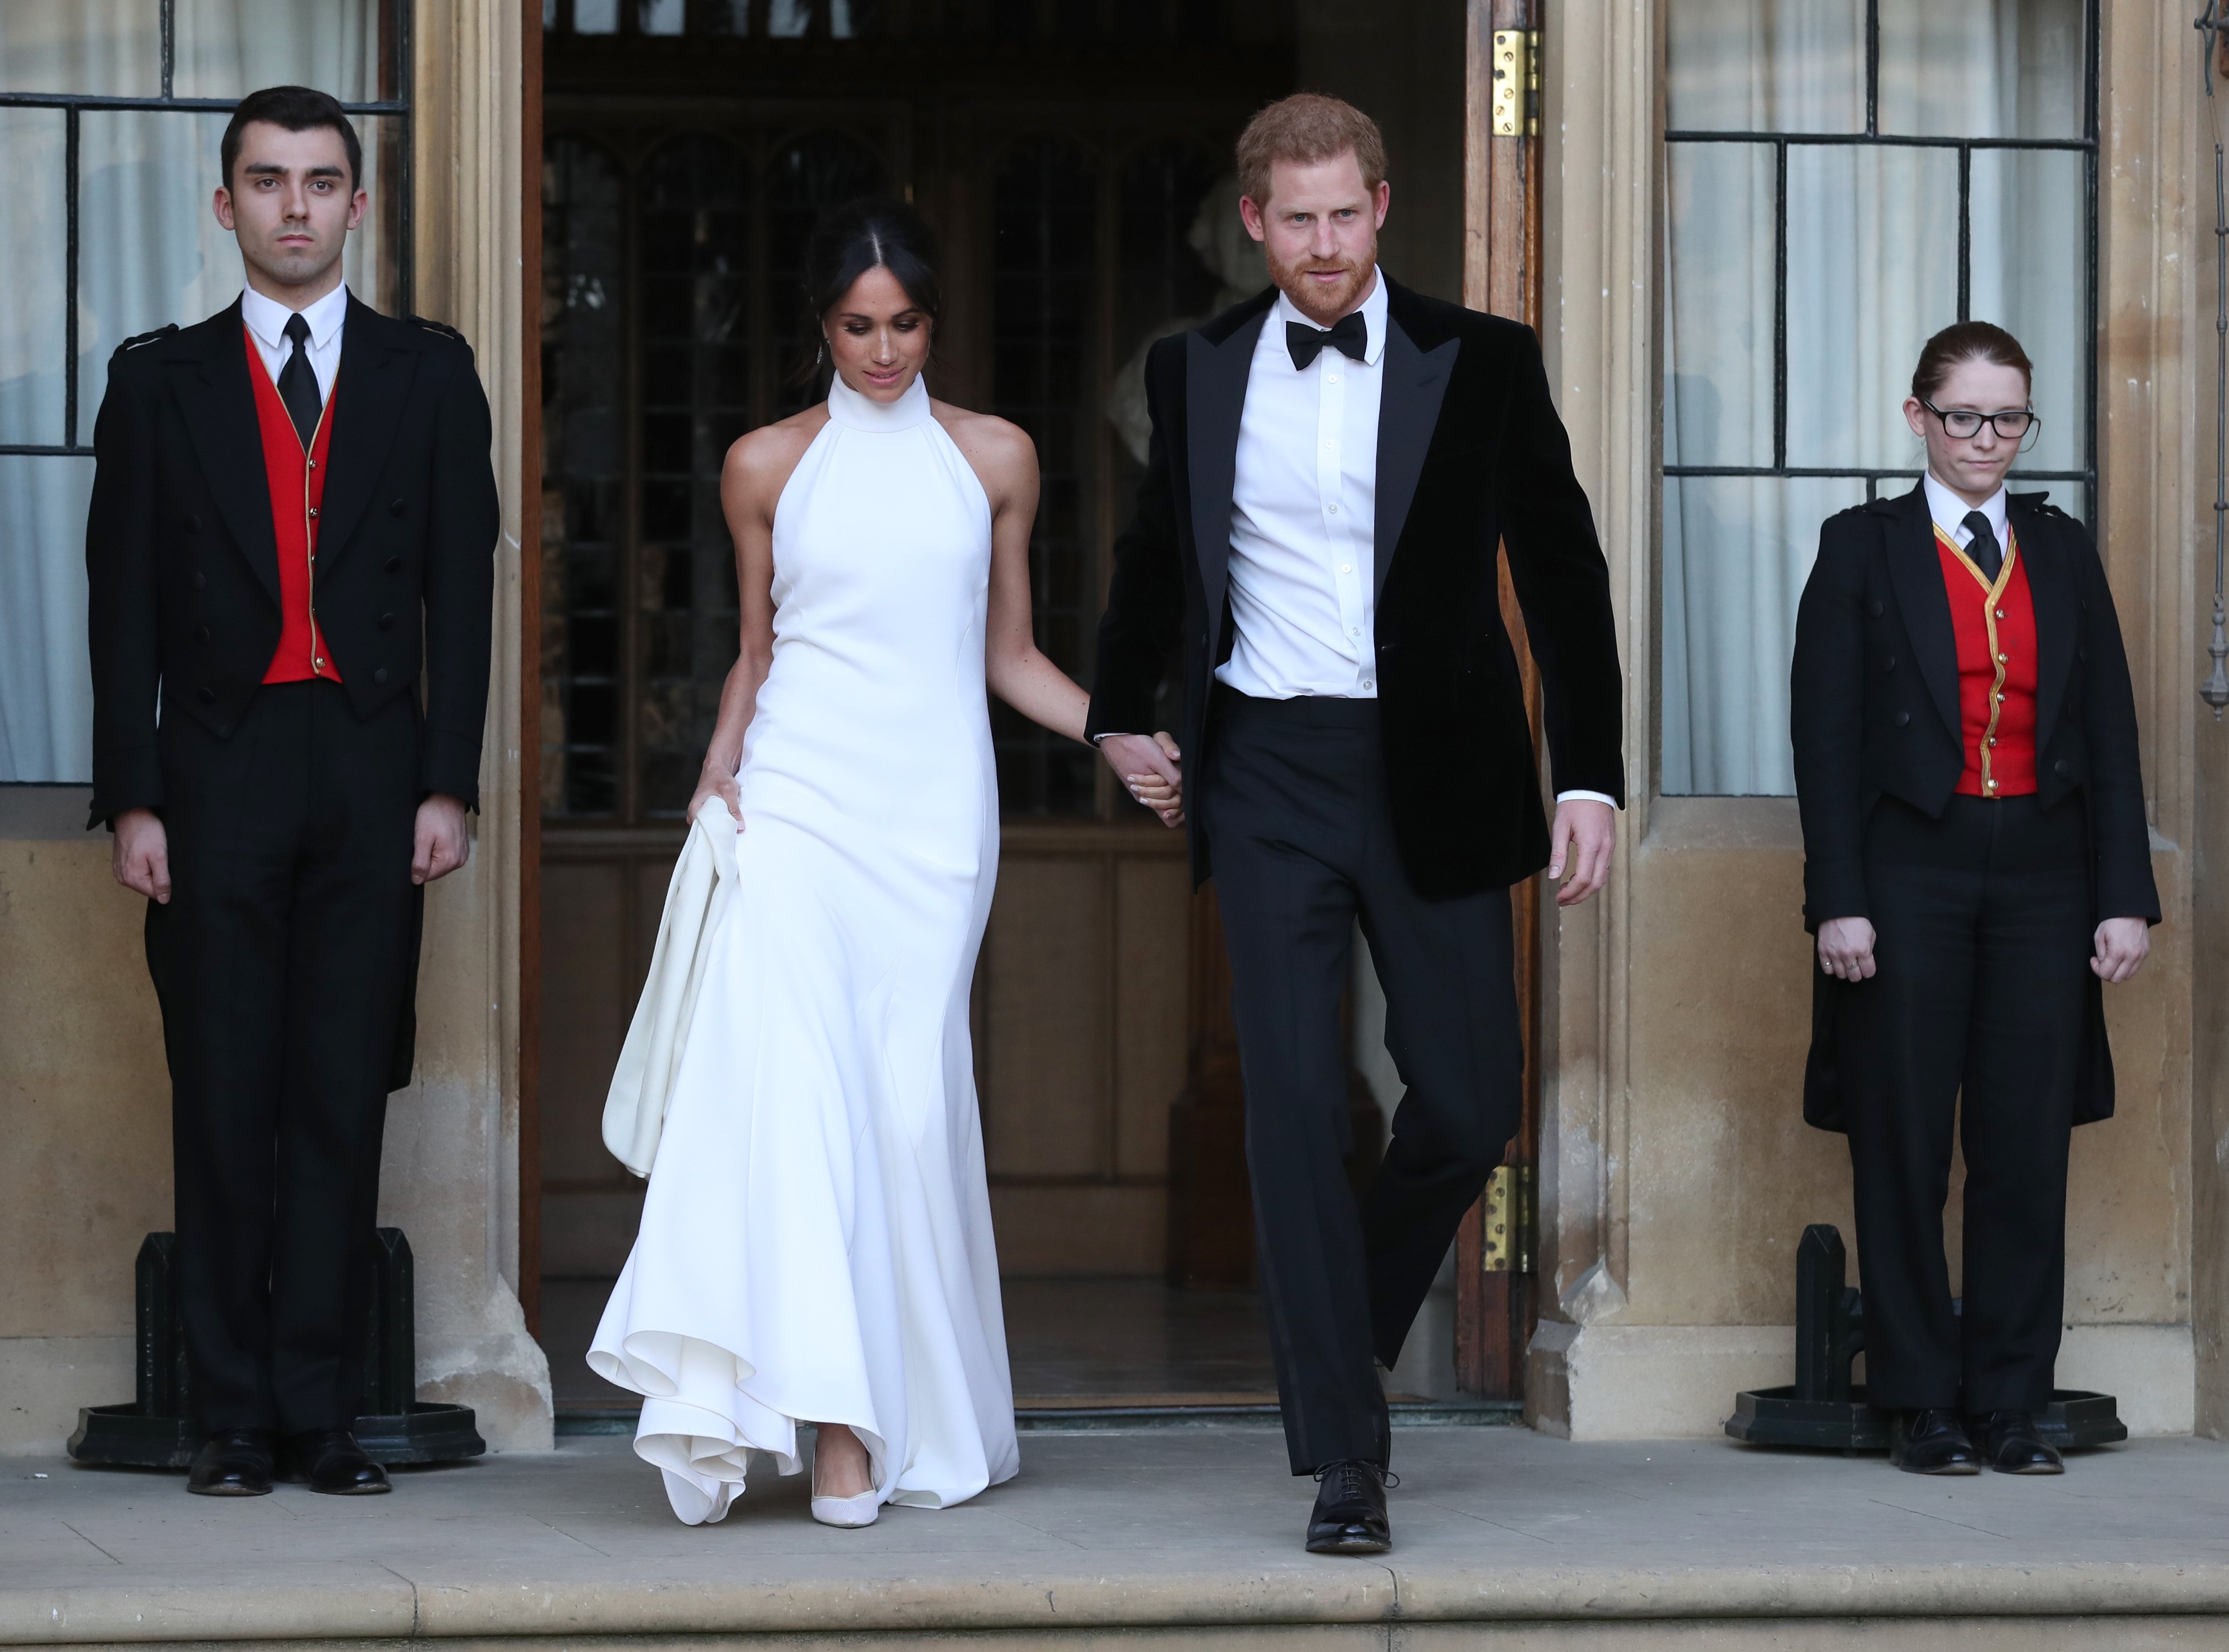 Duchess of Sussex and Prince Harry, Duke of Sussex leave Windsor Castle after their wedding to attend an evening reception at Frogmore House, hosted by the Prince of Wales on May 19, 2018| Photo: Getty Images